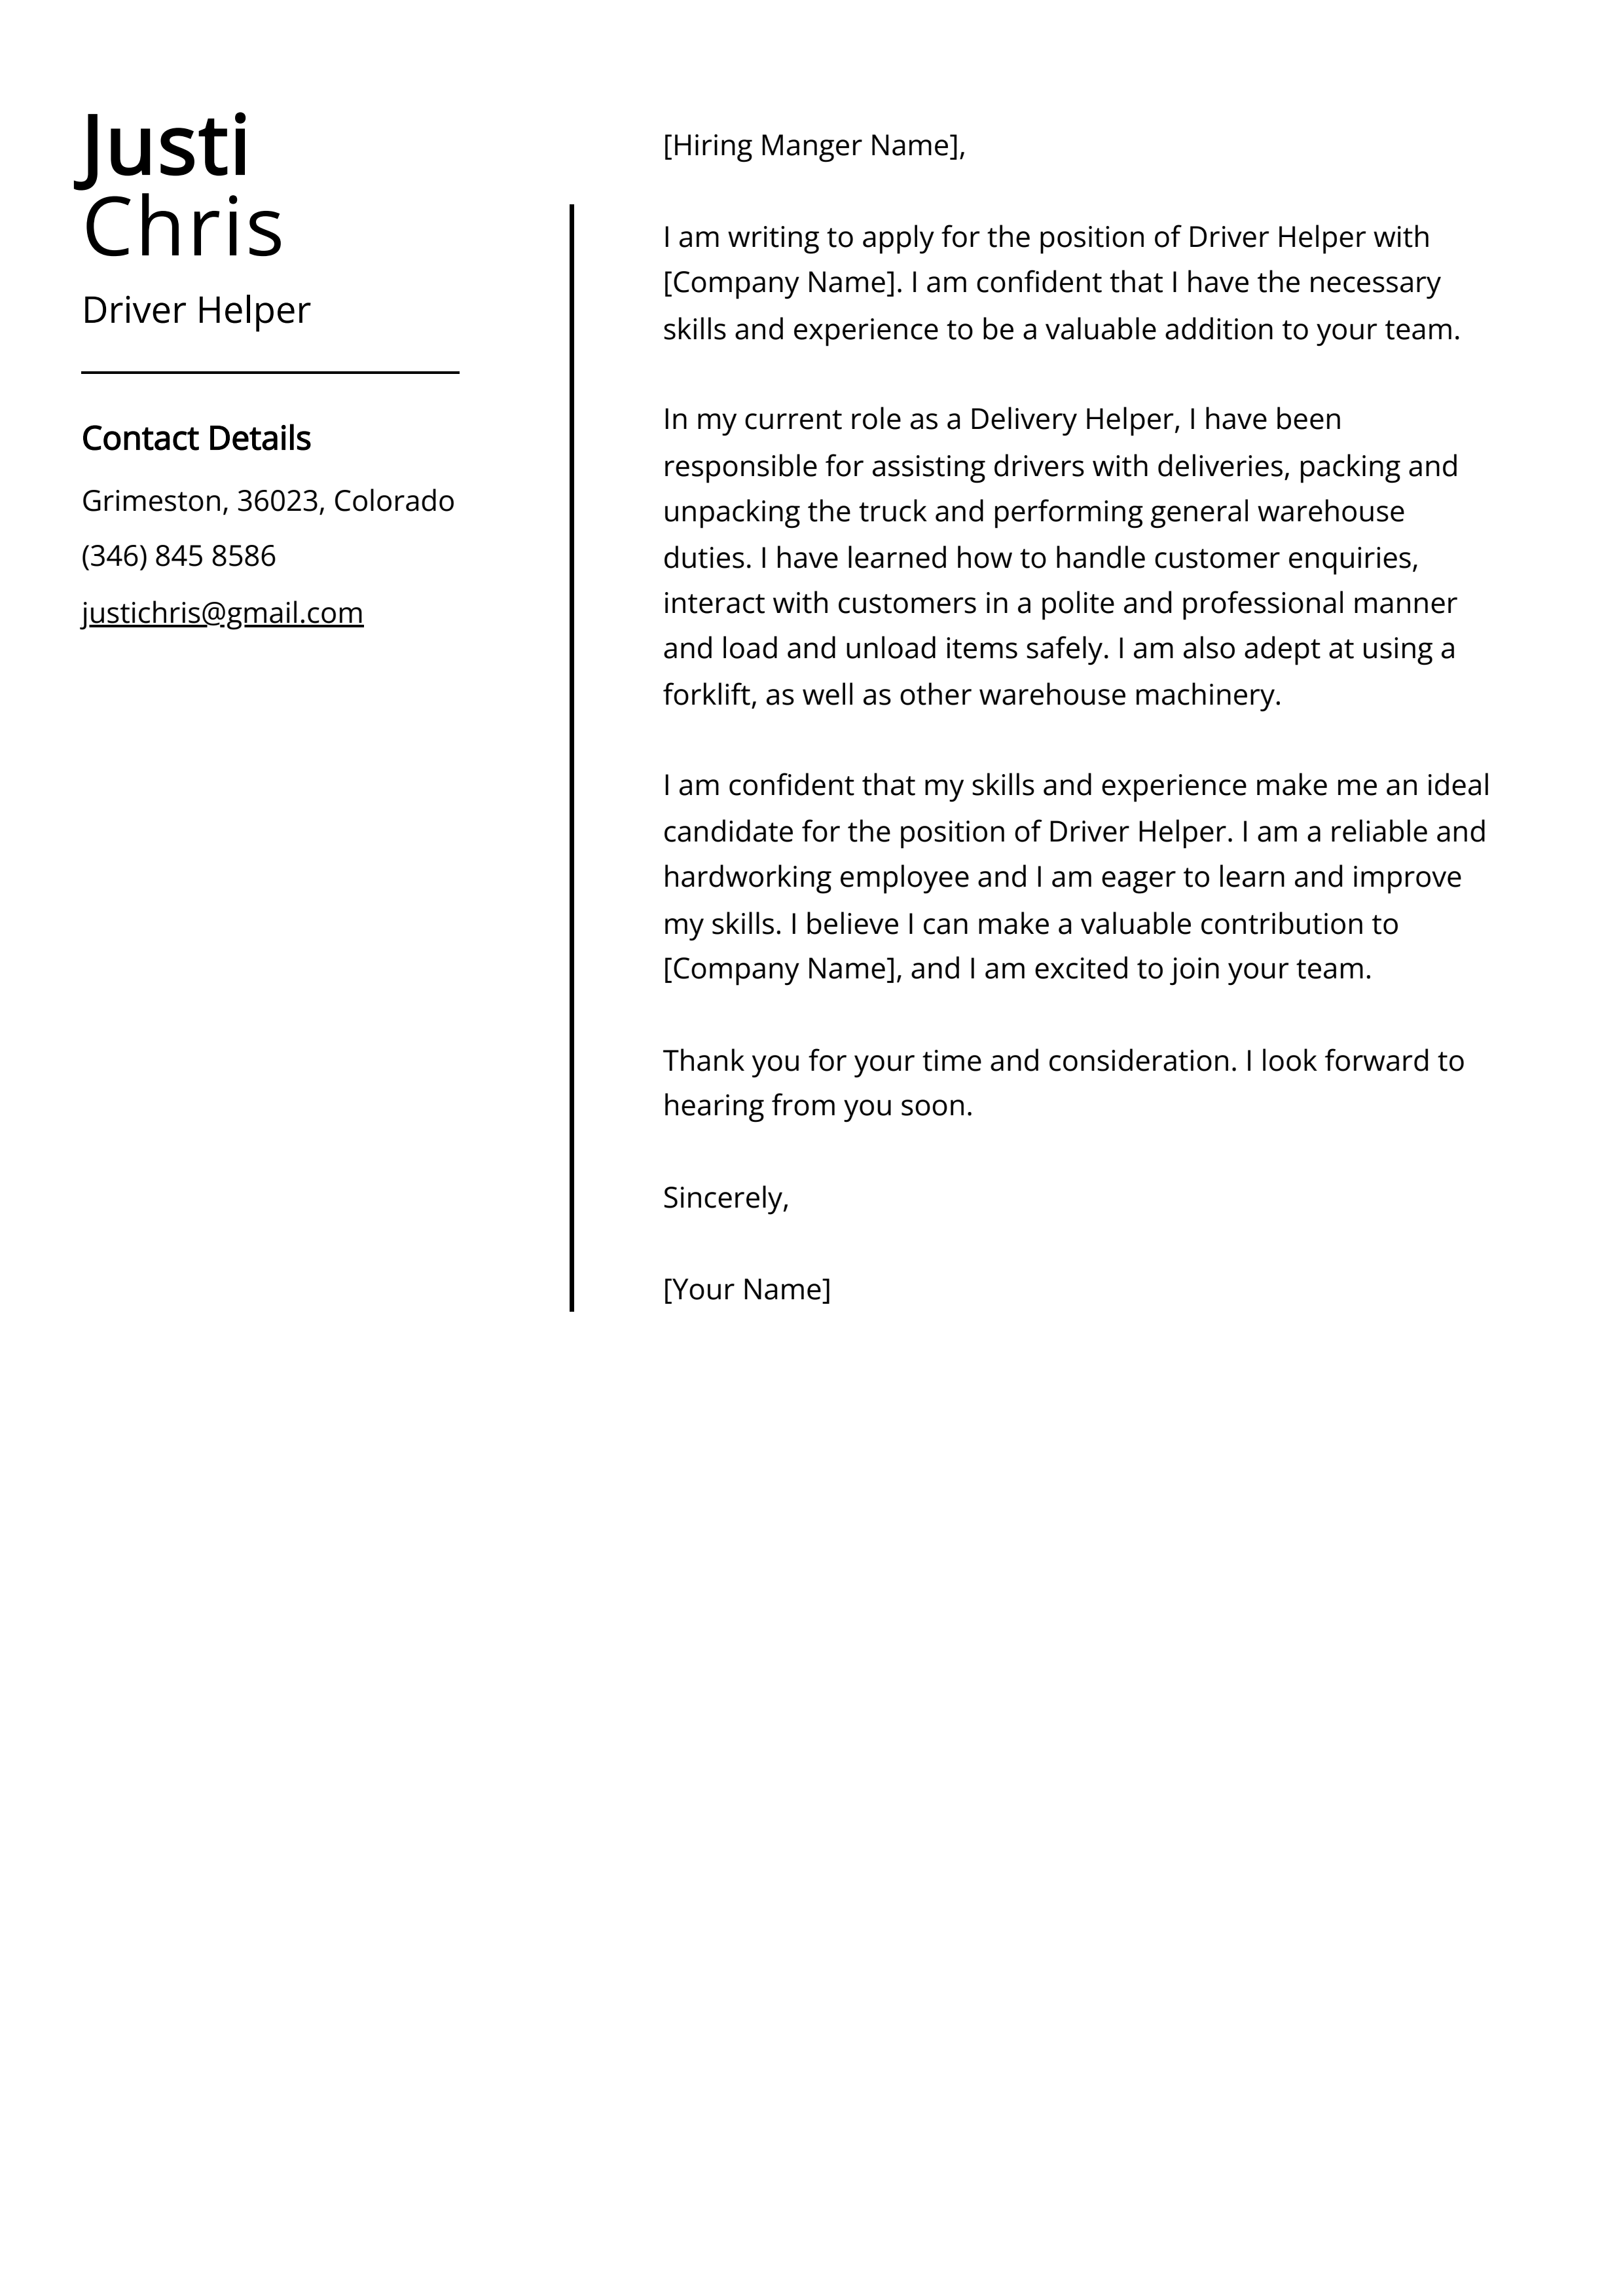 Driver Helper Cover Letter Example